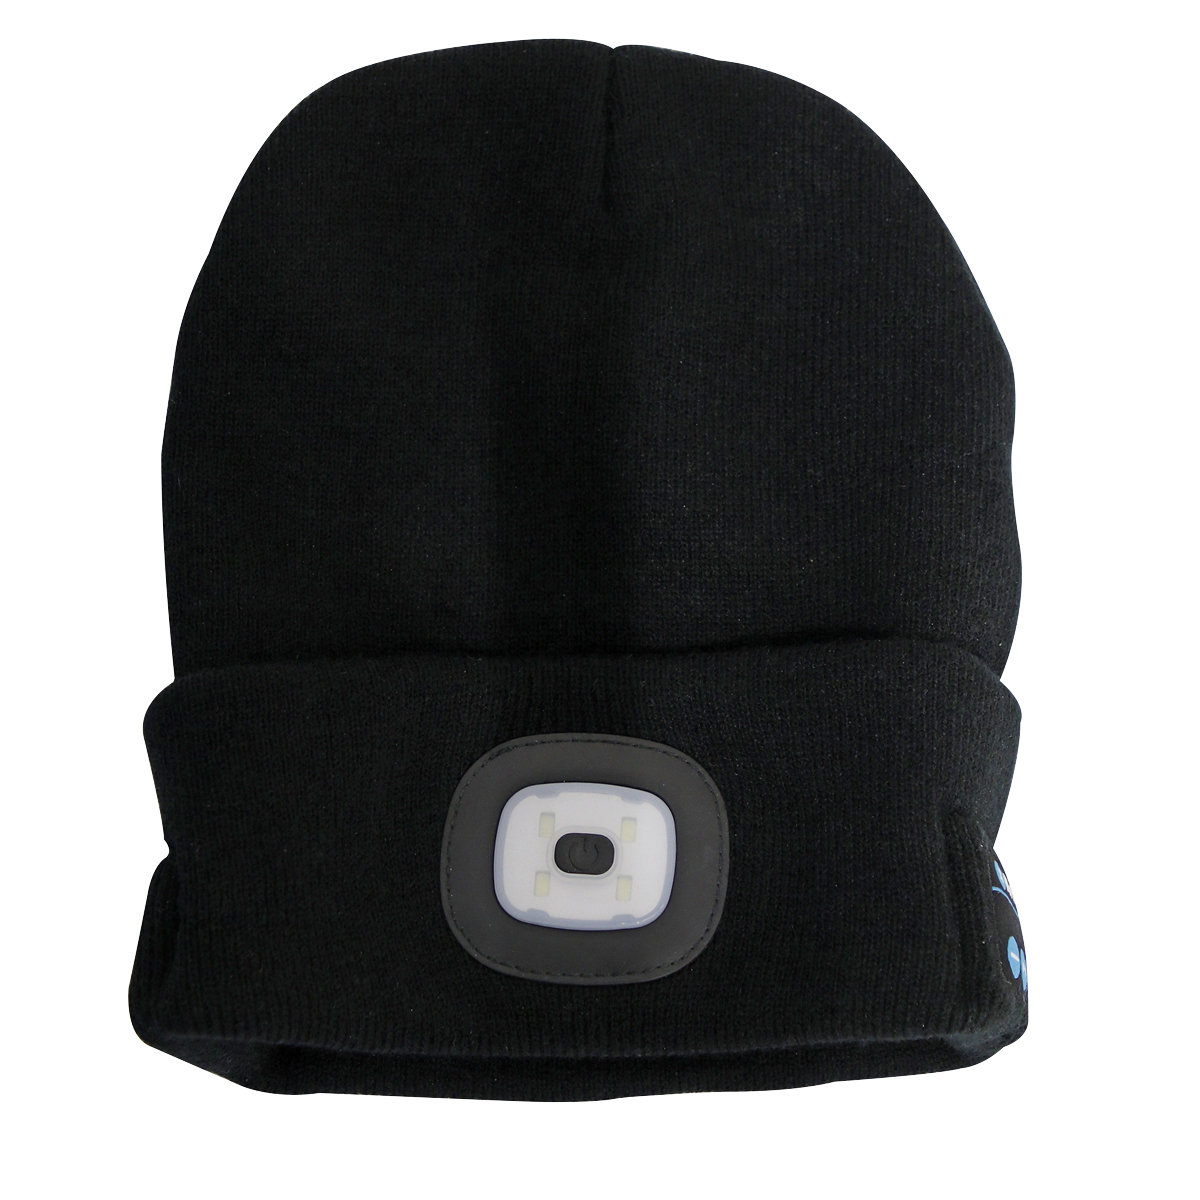 Sealey Beanie Hat 4 SMD LED USB Rechargeable with Wireless Headphones